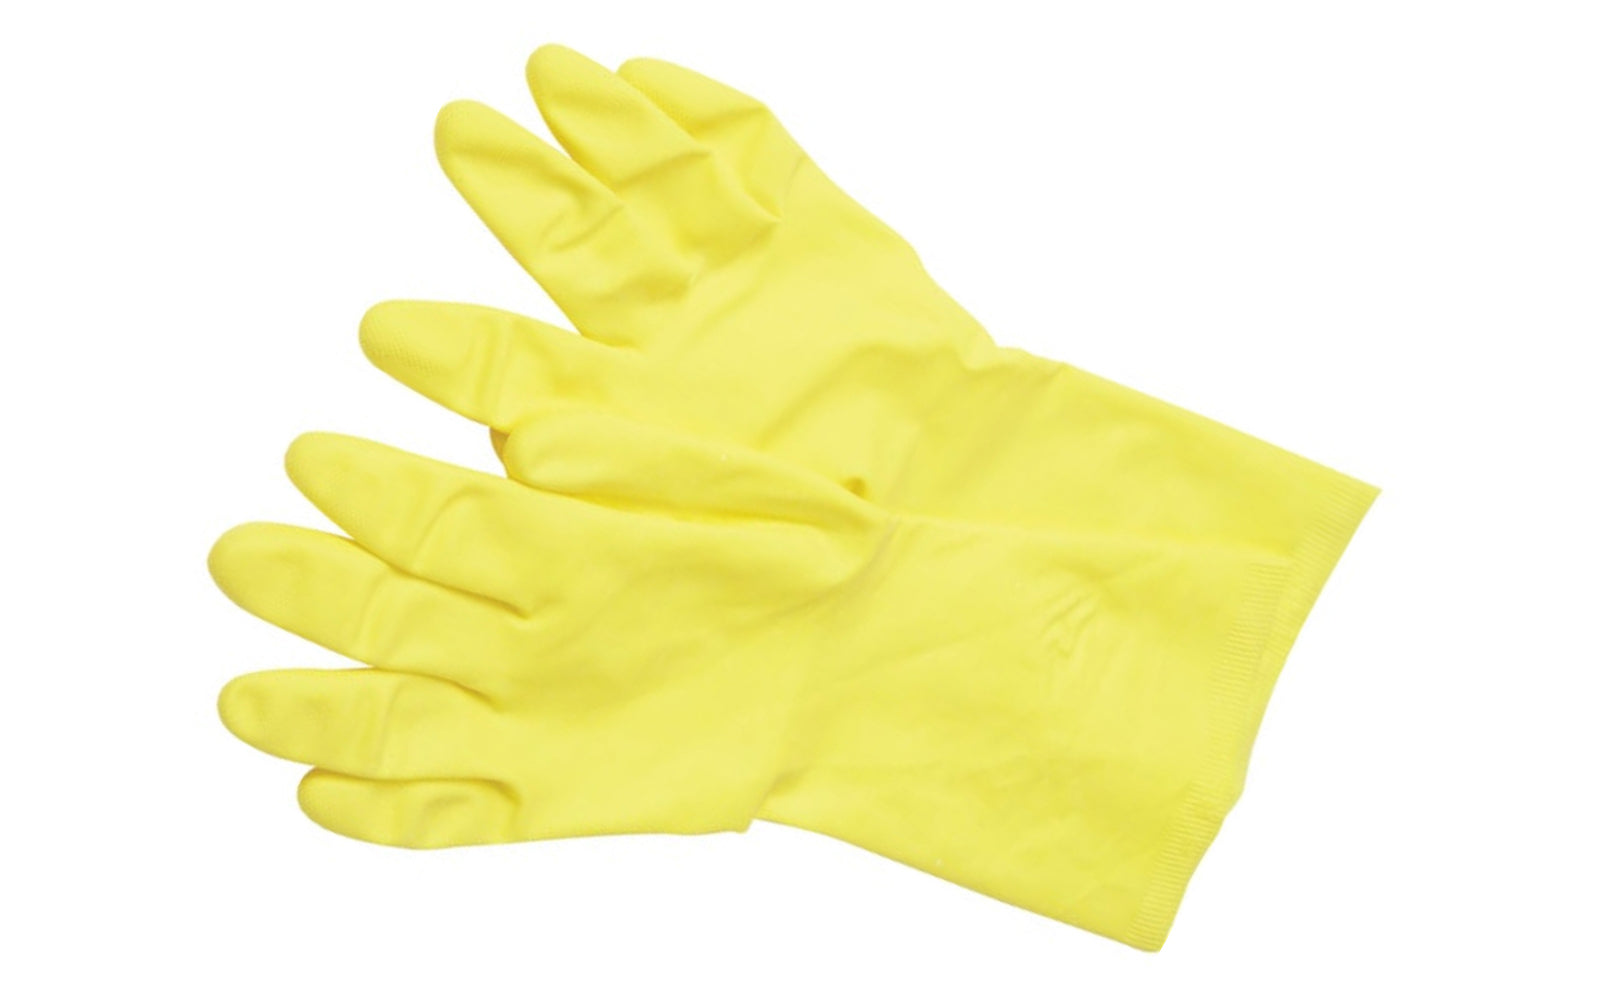 Latex Rubber Gloves - Small. General-purpose for household or shop use. Cotton flock lining. Lightweight flexibility. Reliable embossed grip. Made by Do It.